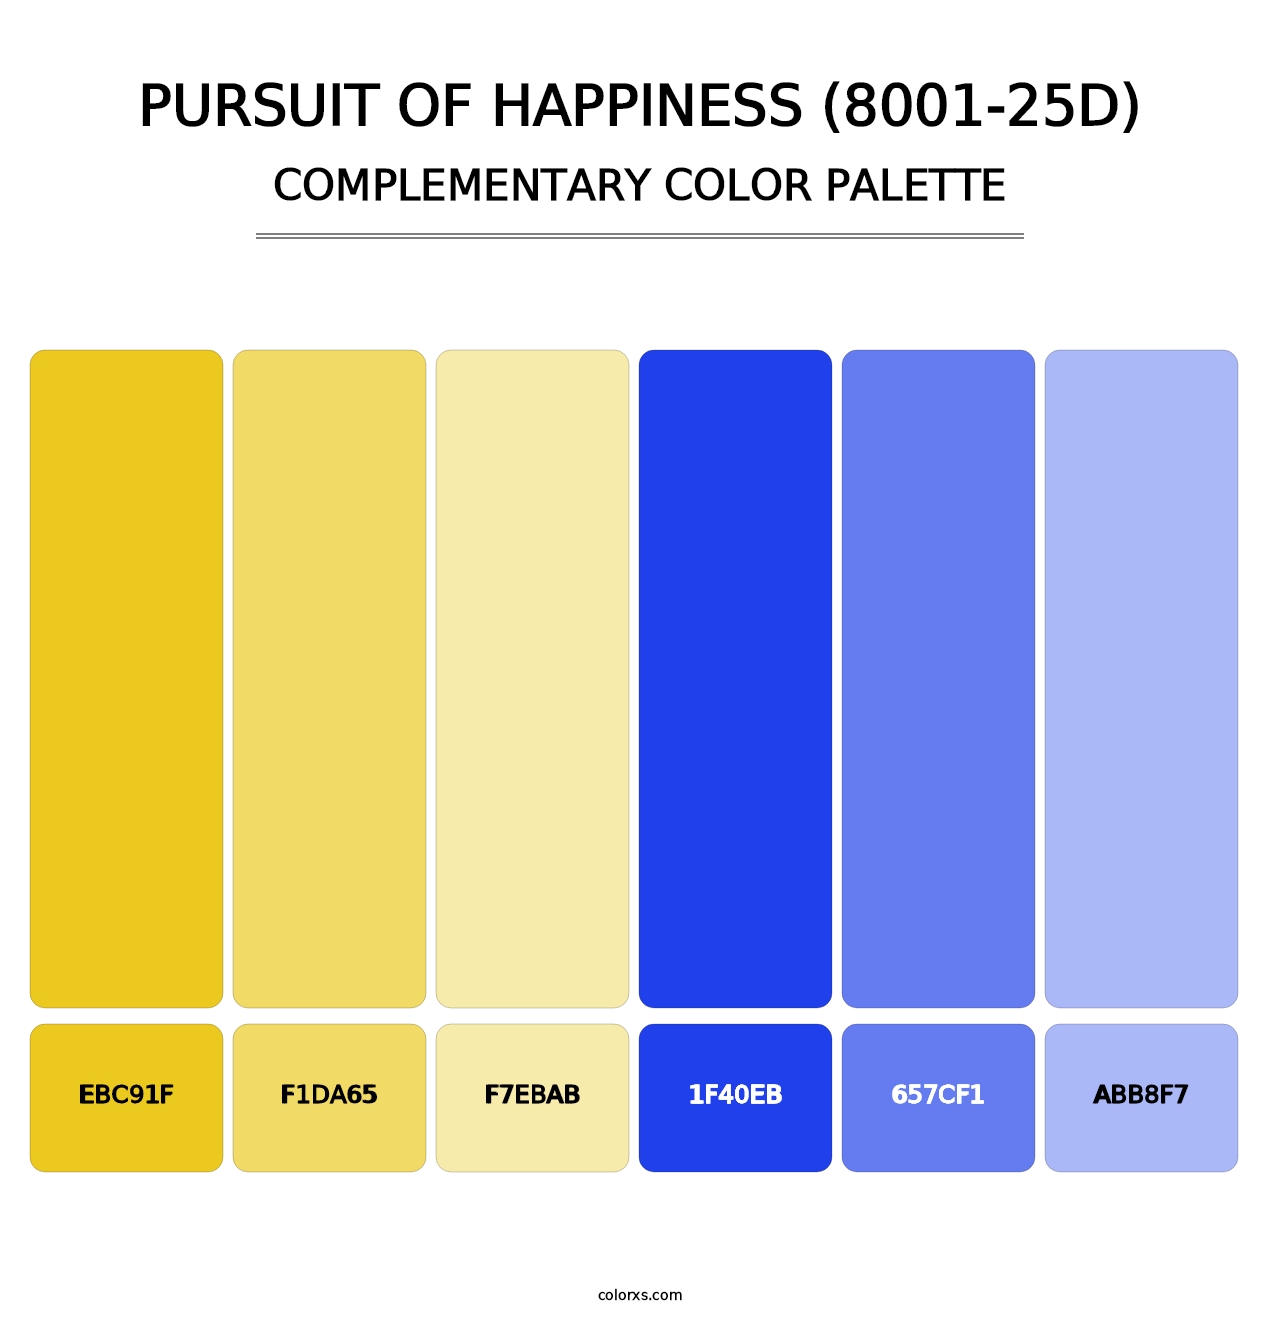 Pursuit of Happiness (8001-25D) - Complementary Color Palette